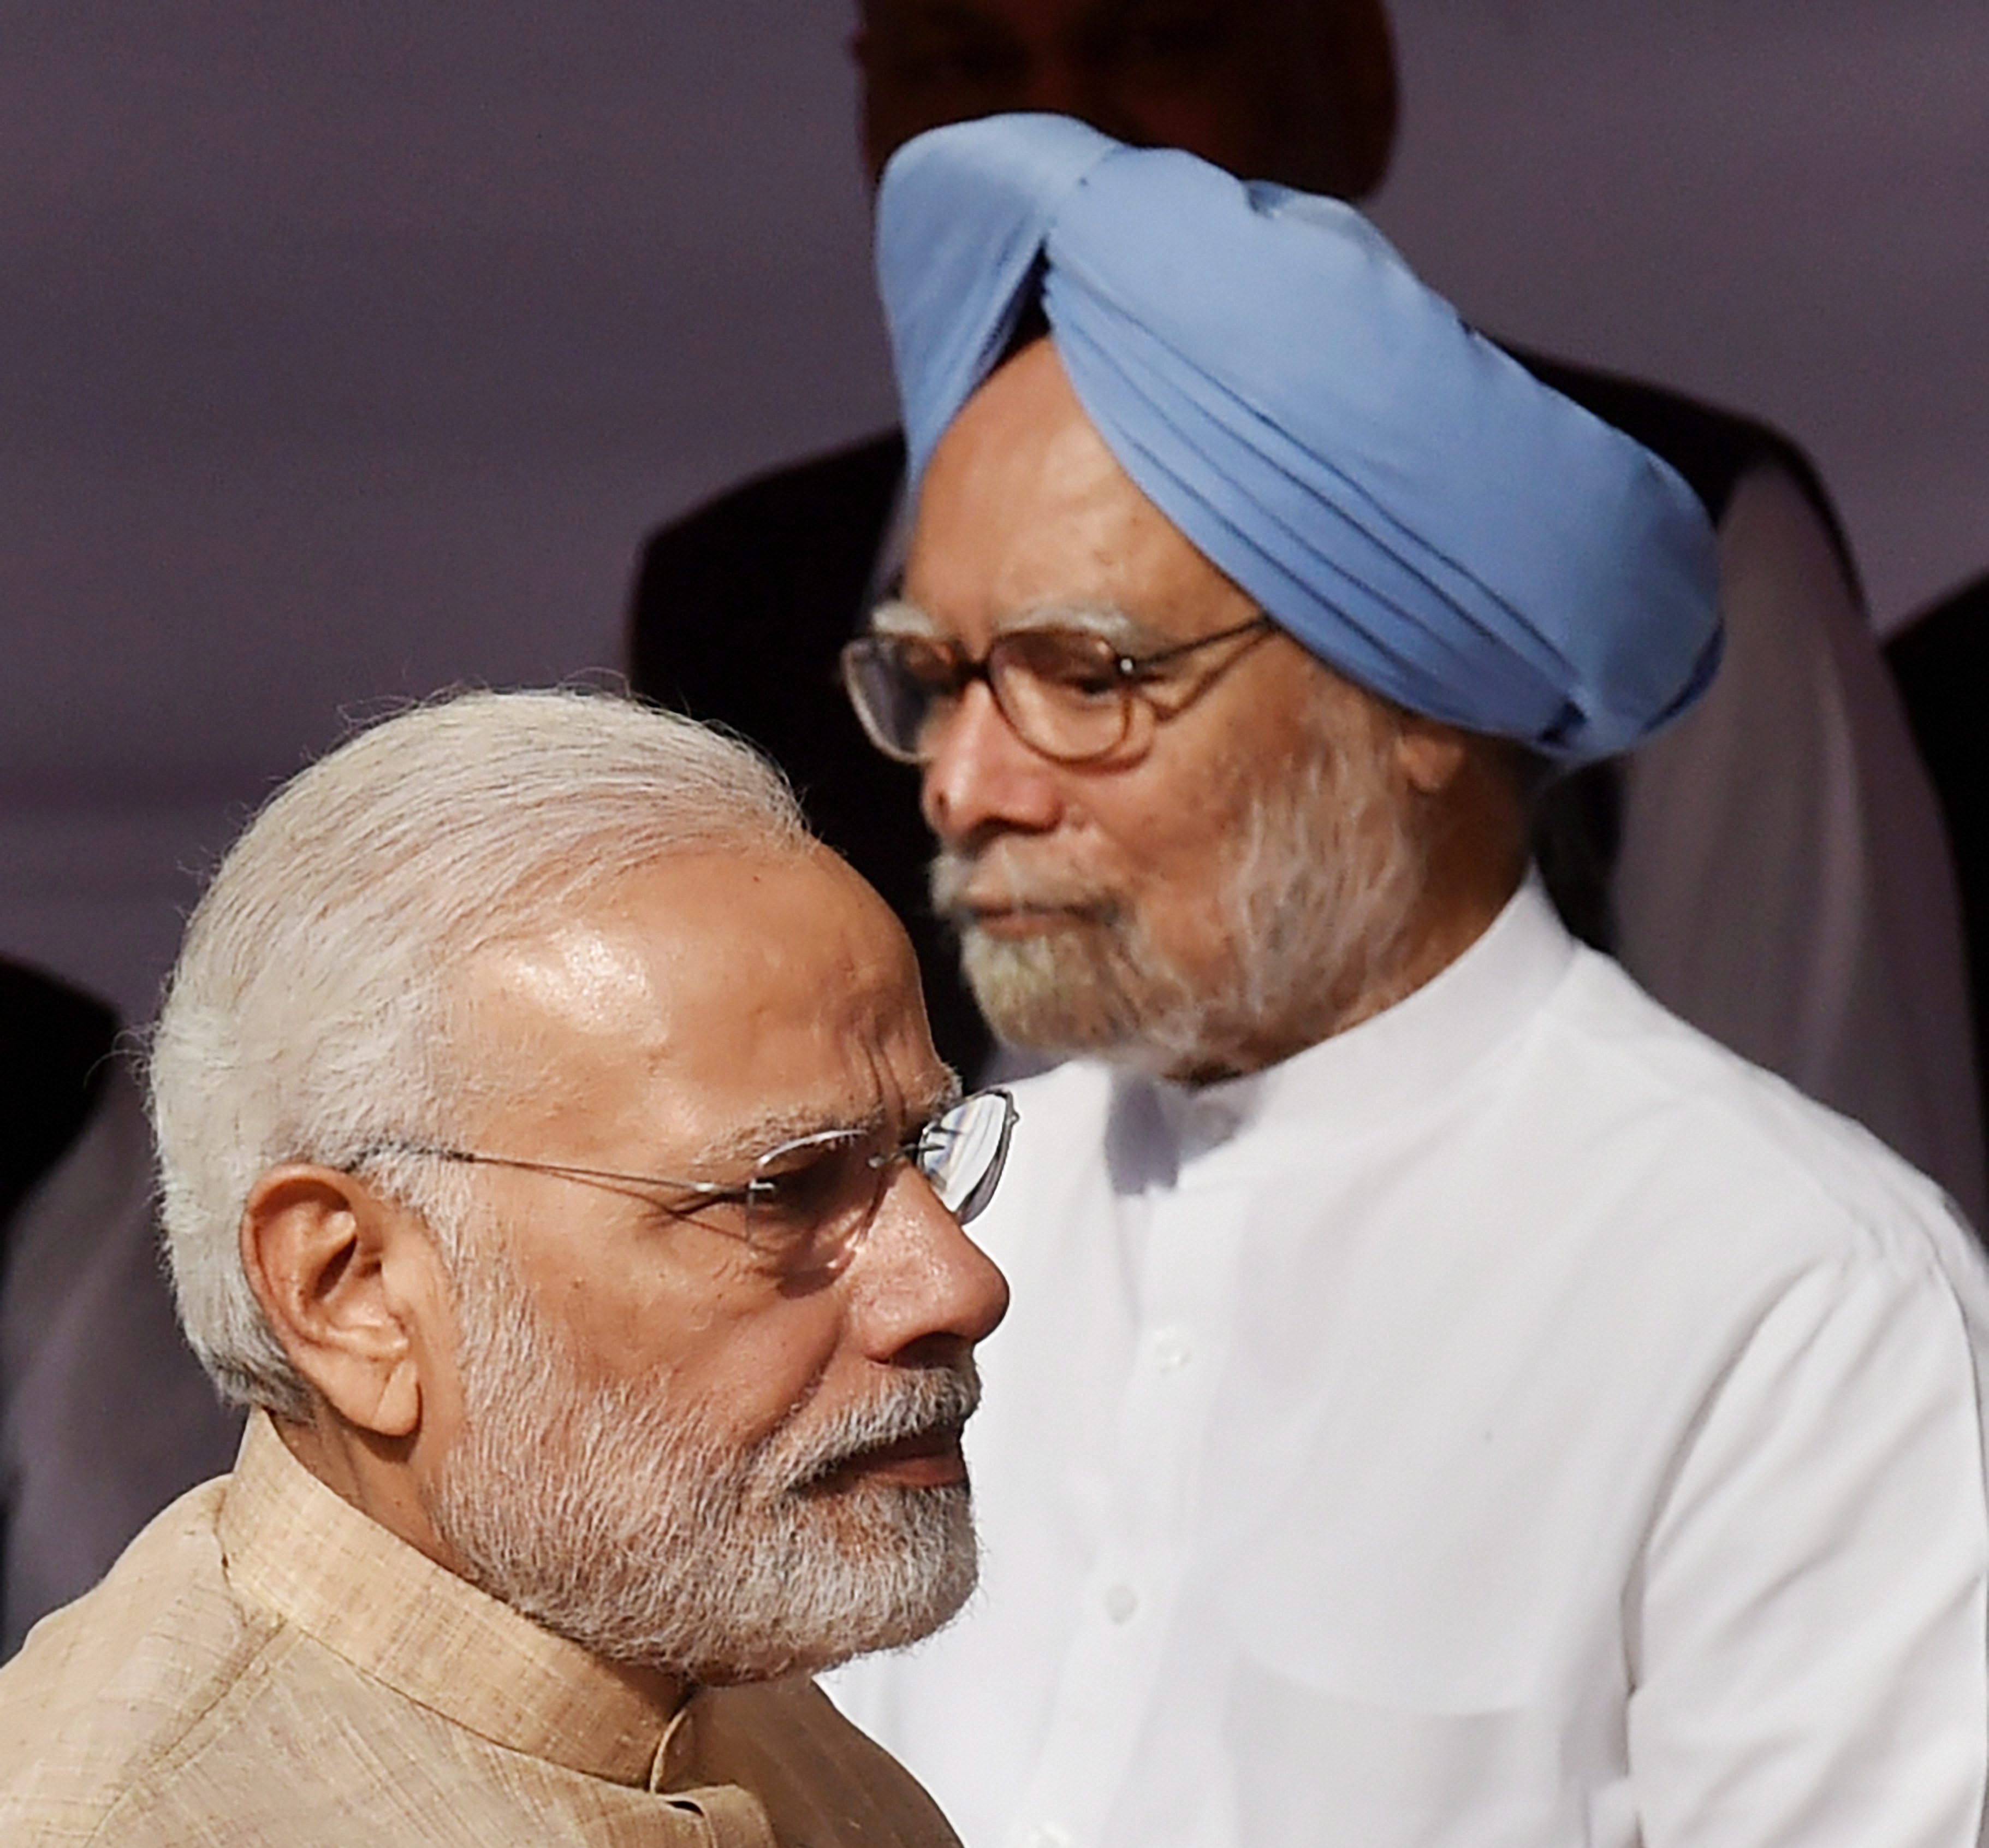 New Delhi: Prime Minister Narendra Modi and former prime minister Manmohan Singh after paying tributes to Babasaheb B R Ambedkar on the occasion of his 127th birth anniversary, at Parliament House in New Delhi on Saturday. PTI Photo by Atul Yadav (PTI4_14_2018_000022B)